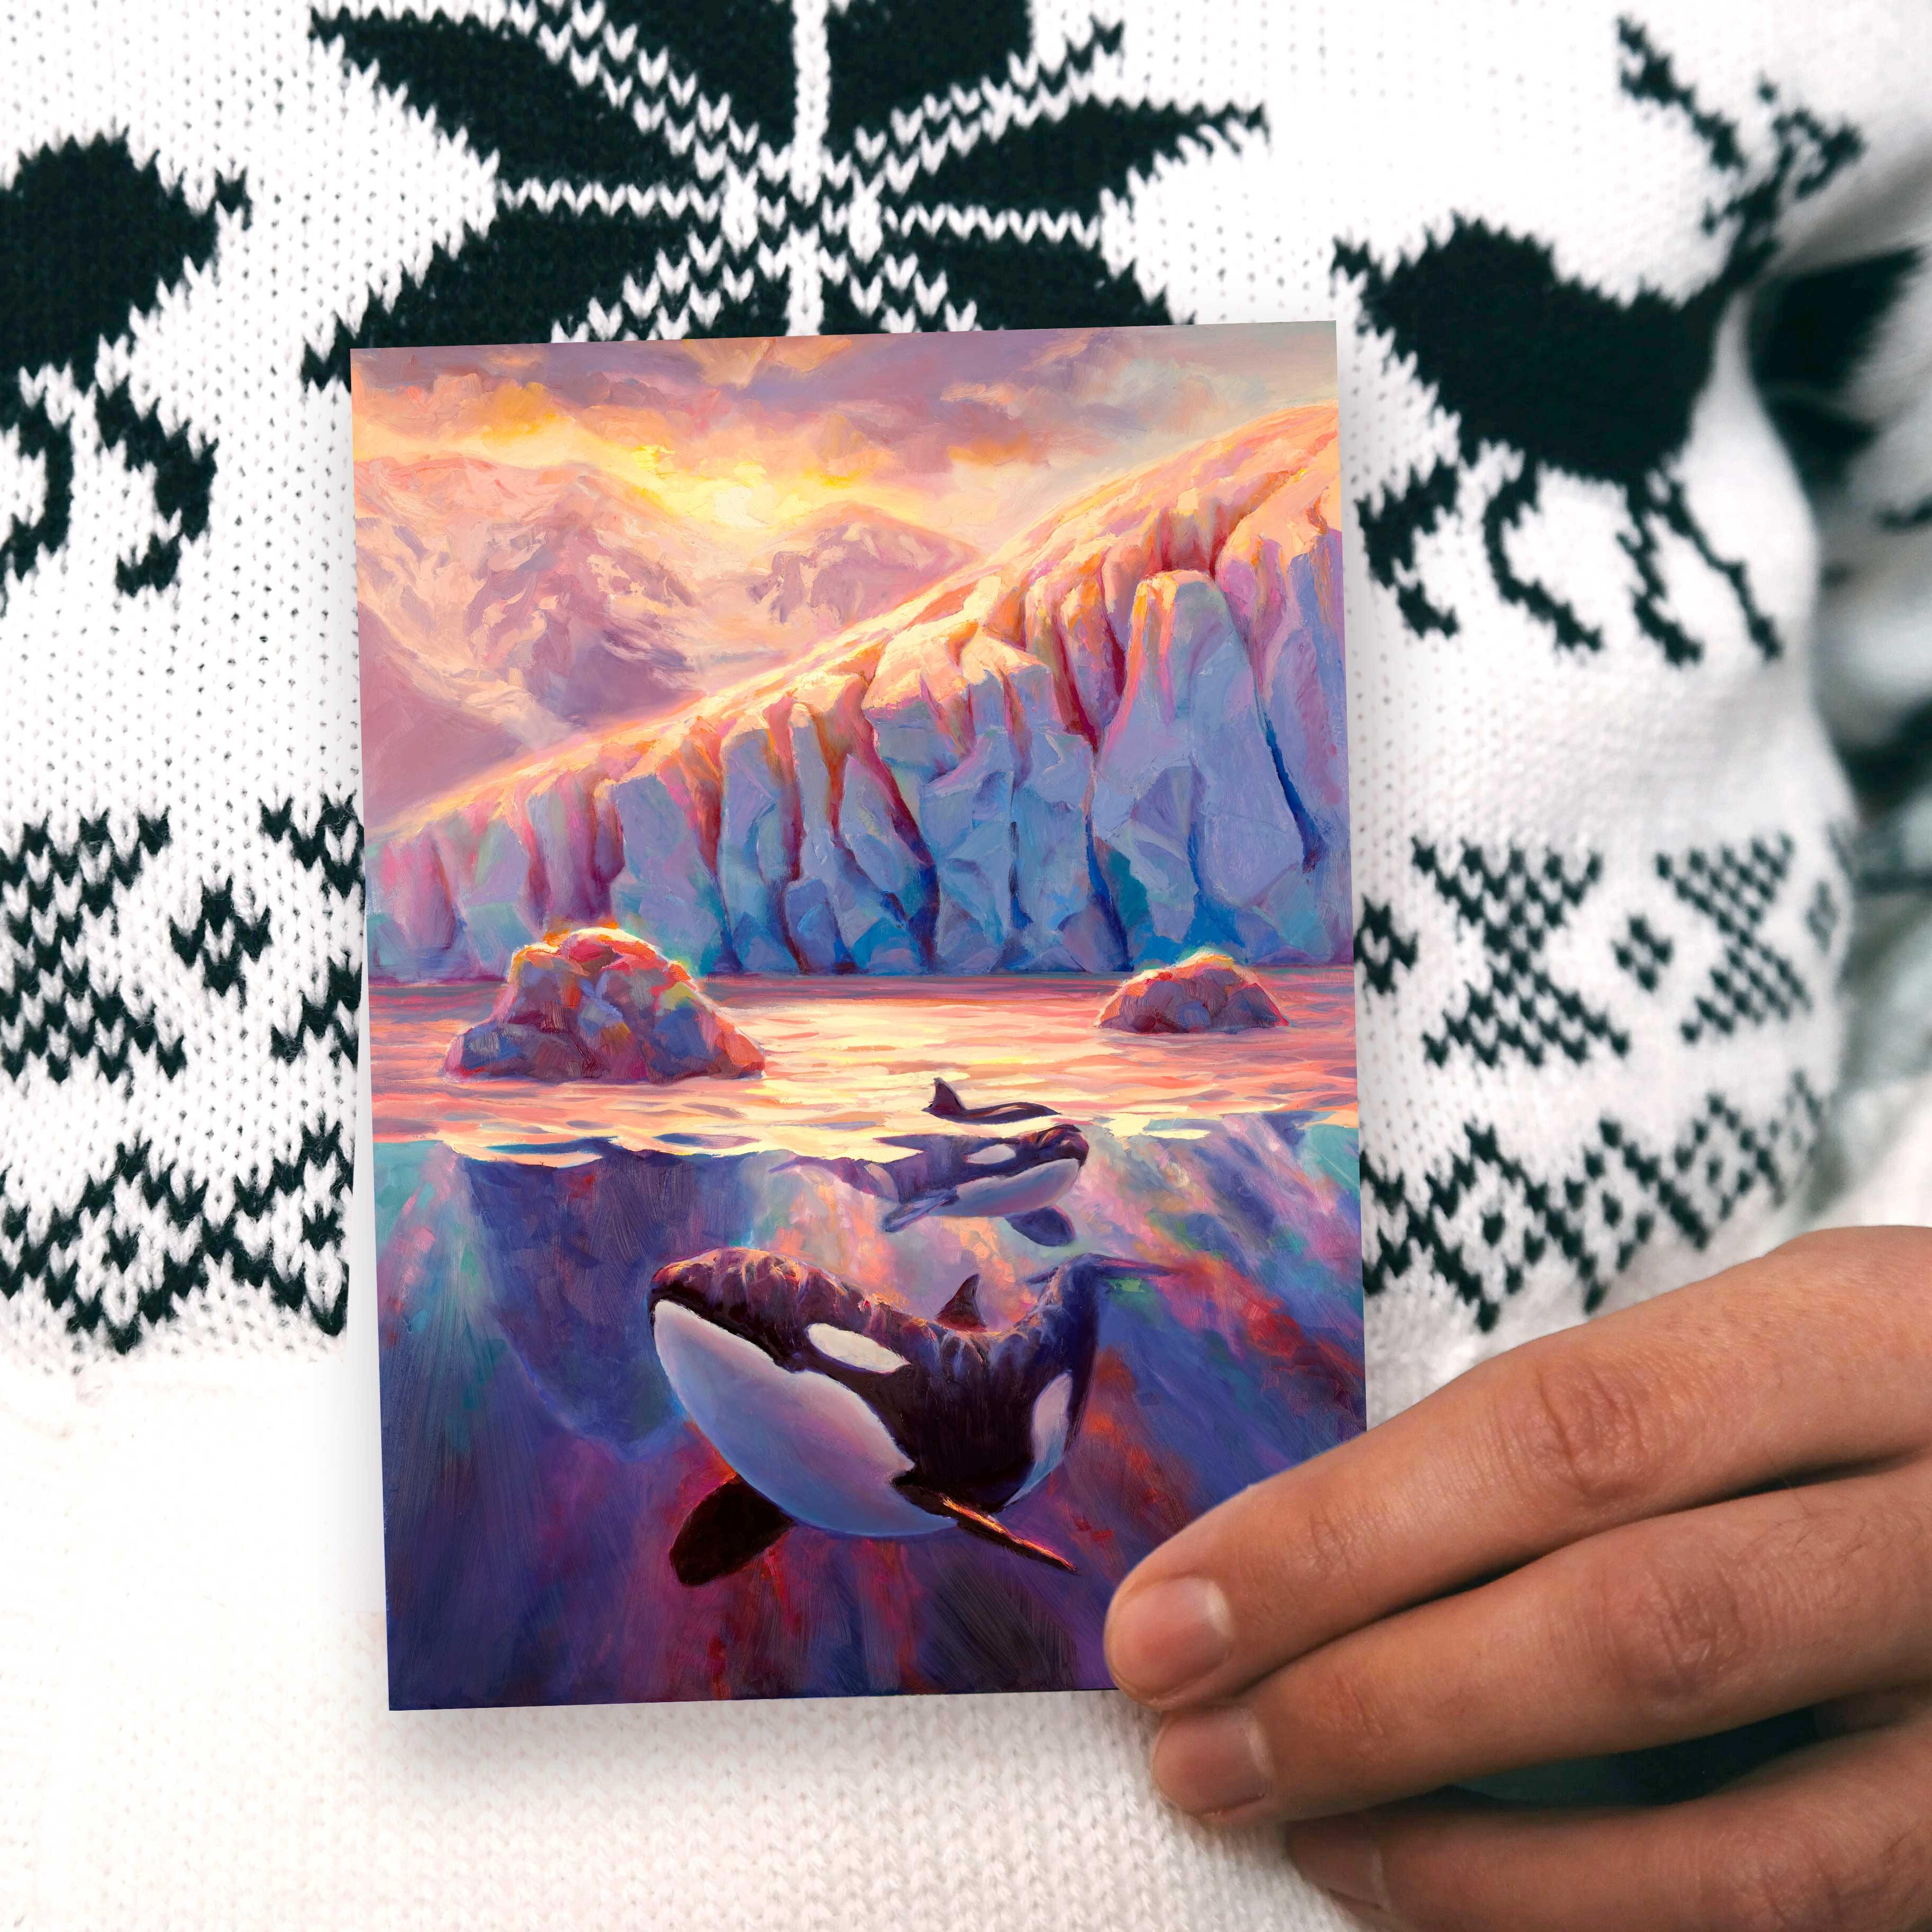 Orca Killer Whale greeting card with Glacier Fjord at Sunrise By Alaska artist Karen Whitworth